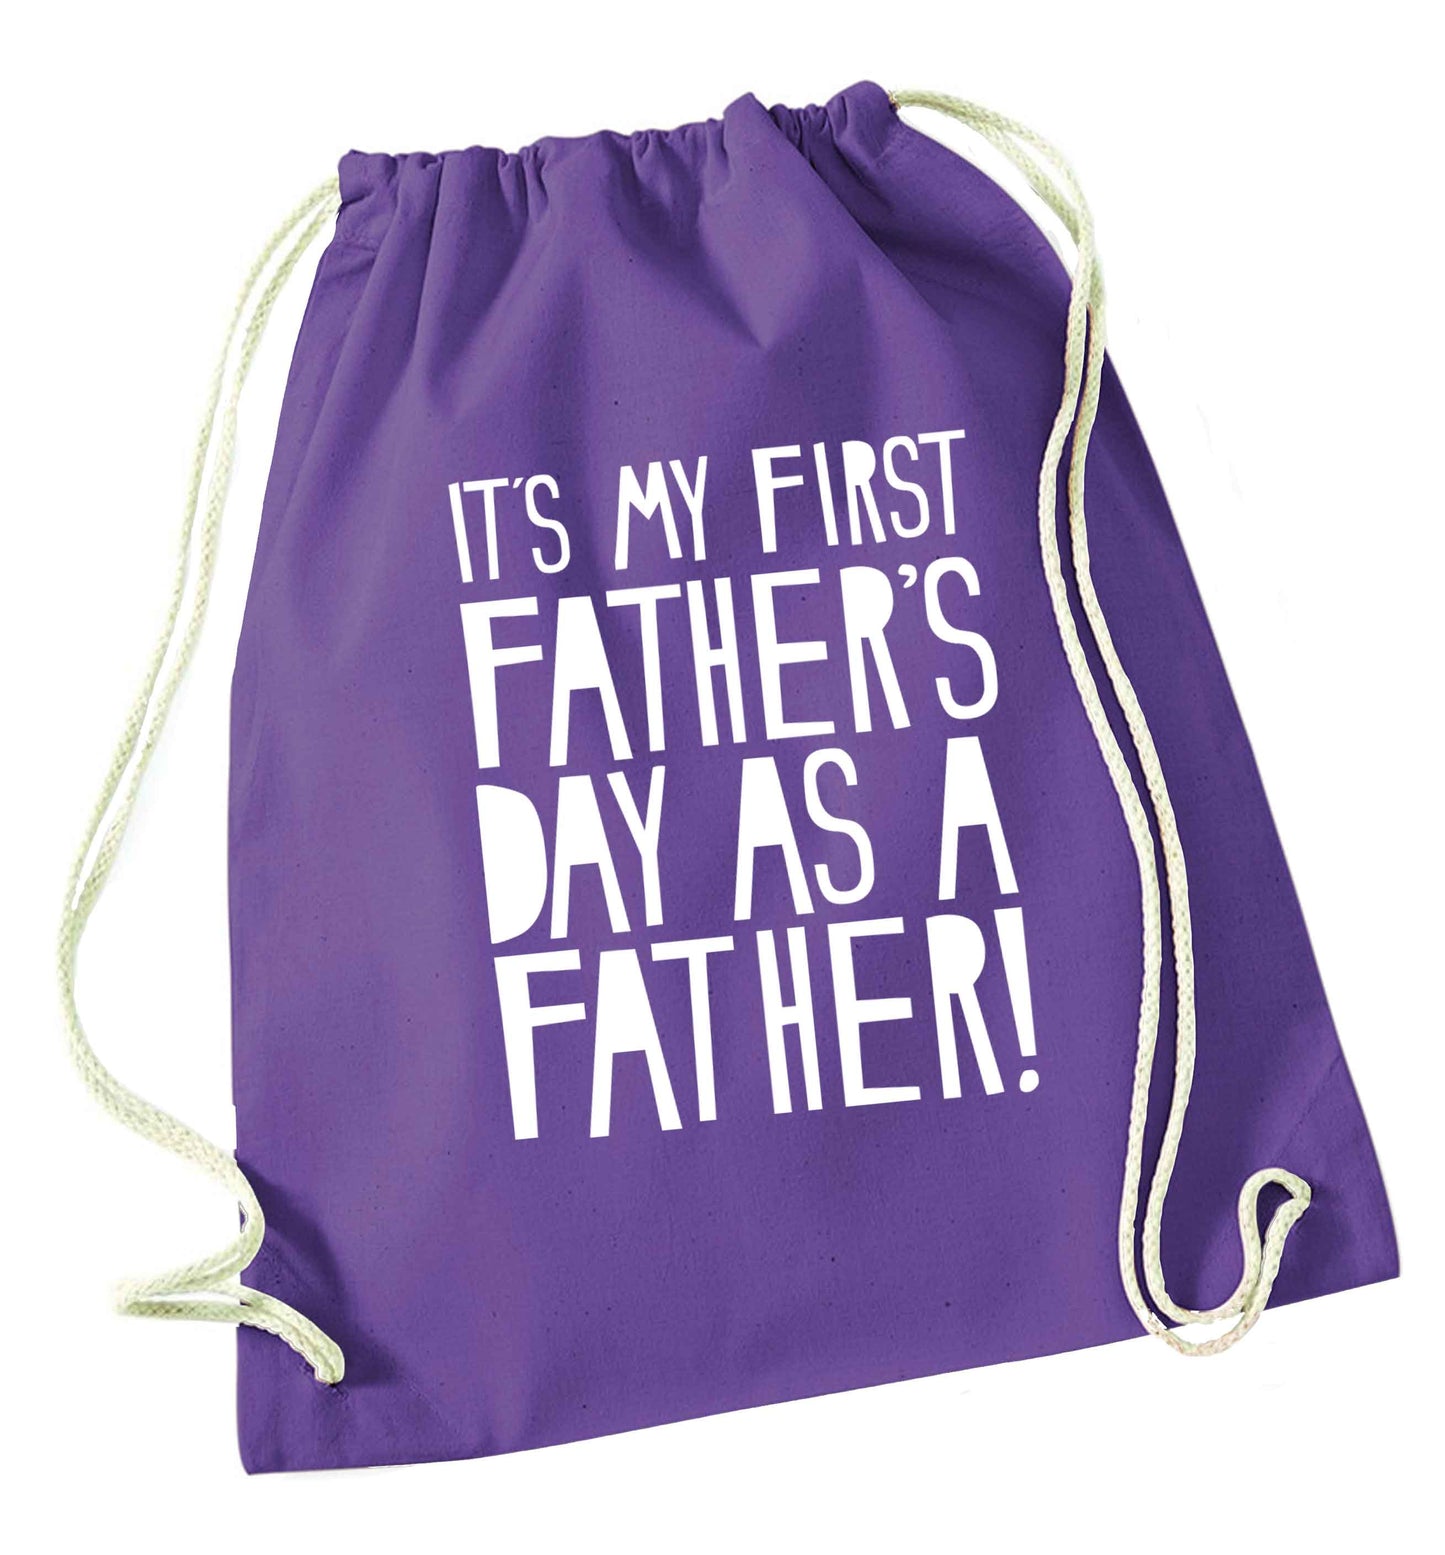 It's my first father's day as a father! purple drawstring bag